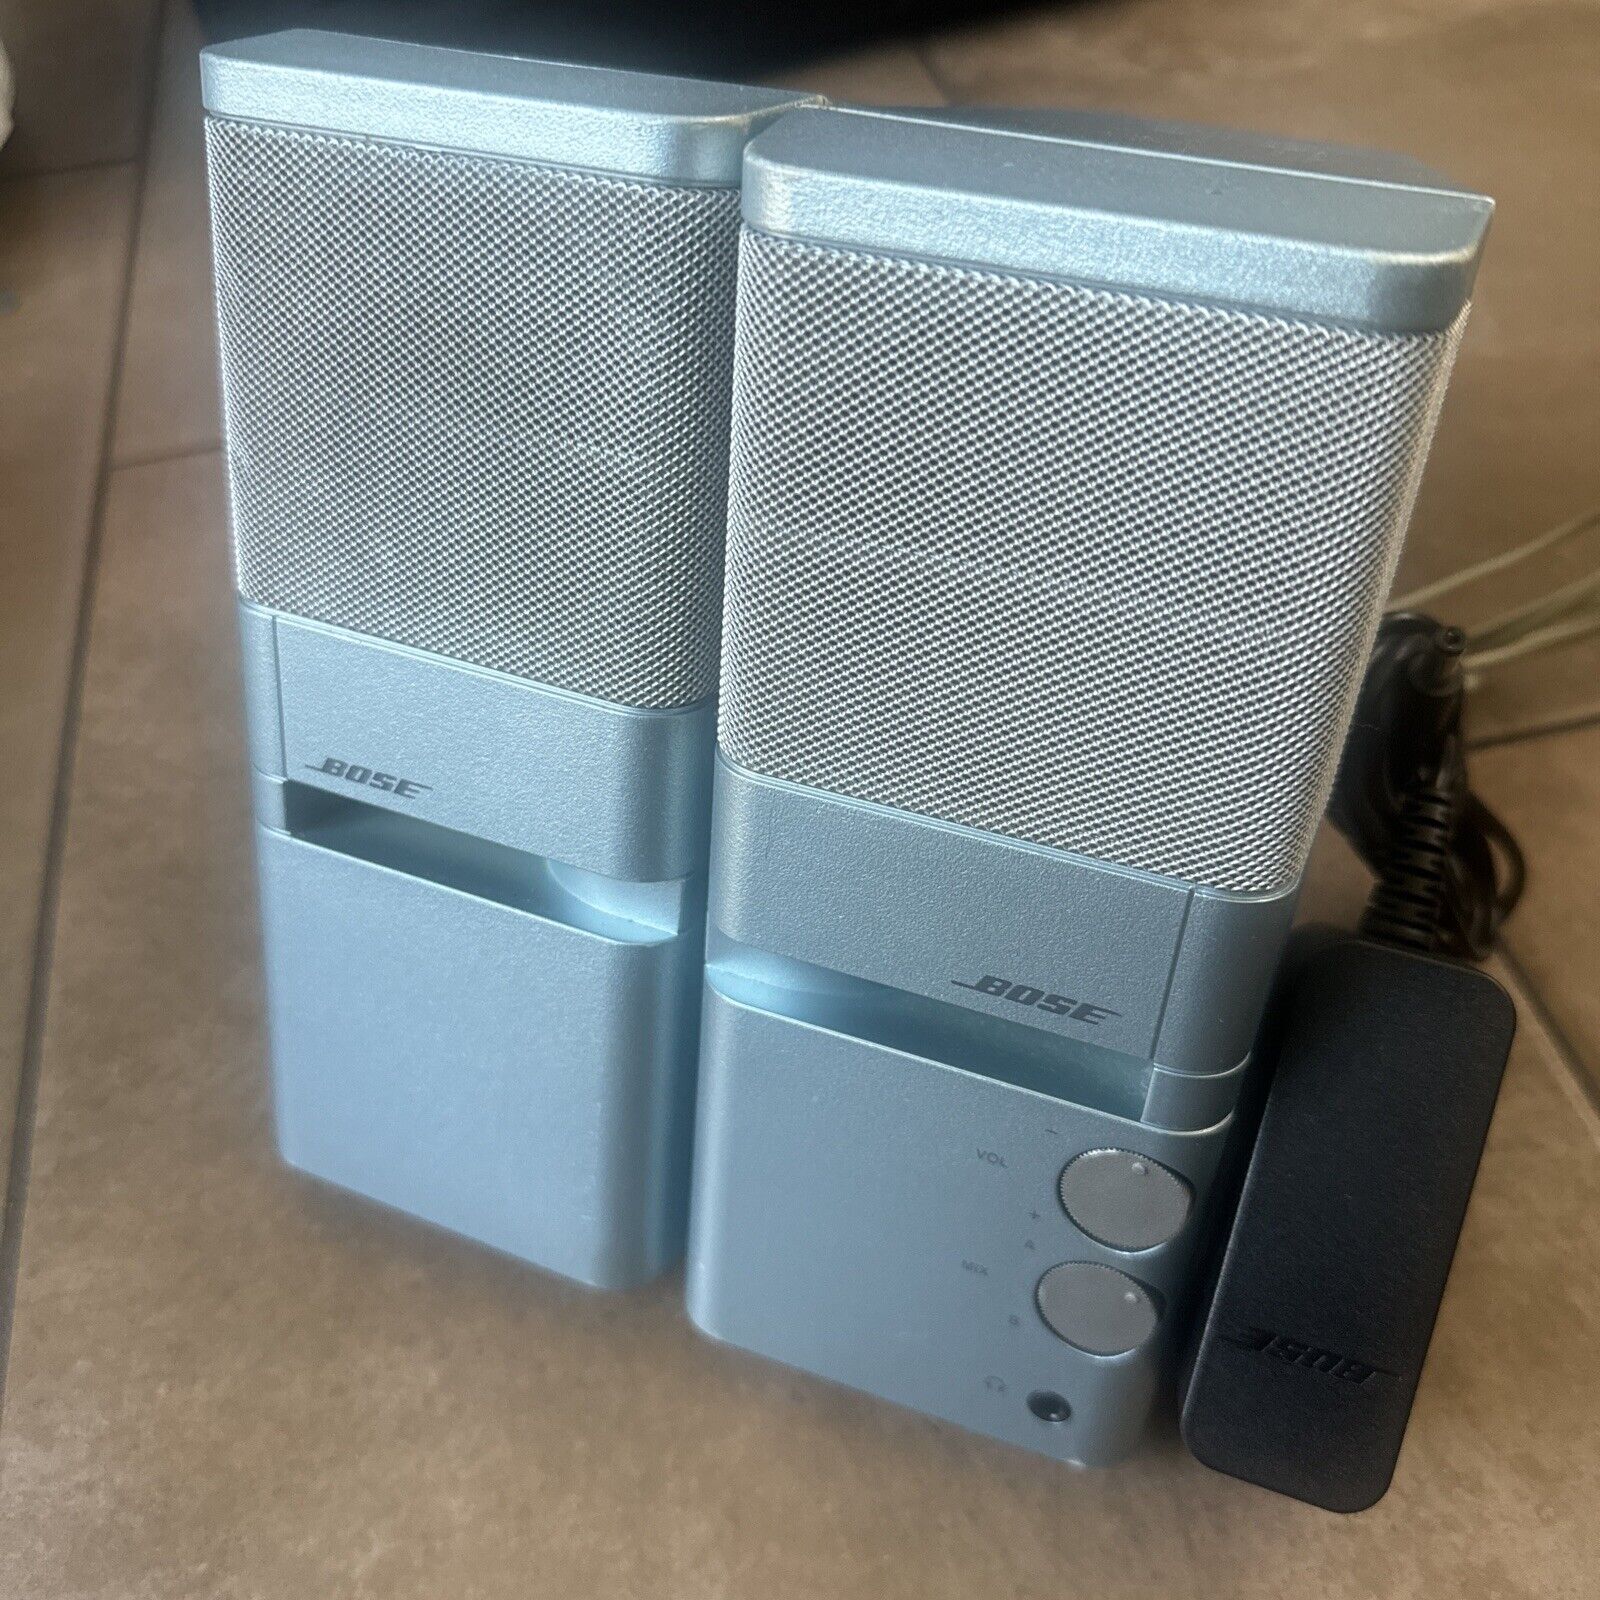 BOSE MediaMate Computer Speakers Personal Stereo Ice Blue Pair Tested With AC